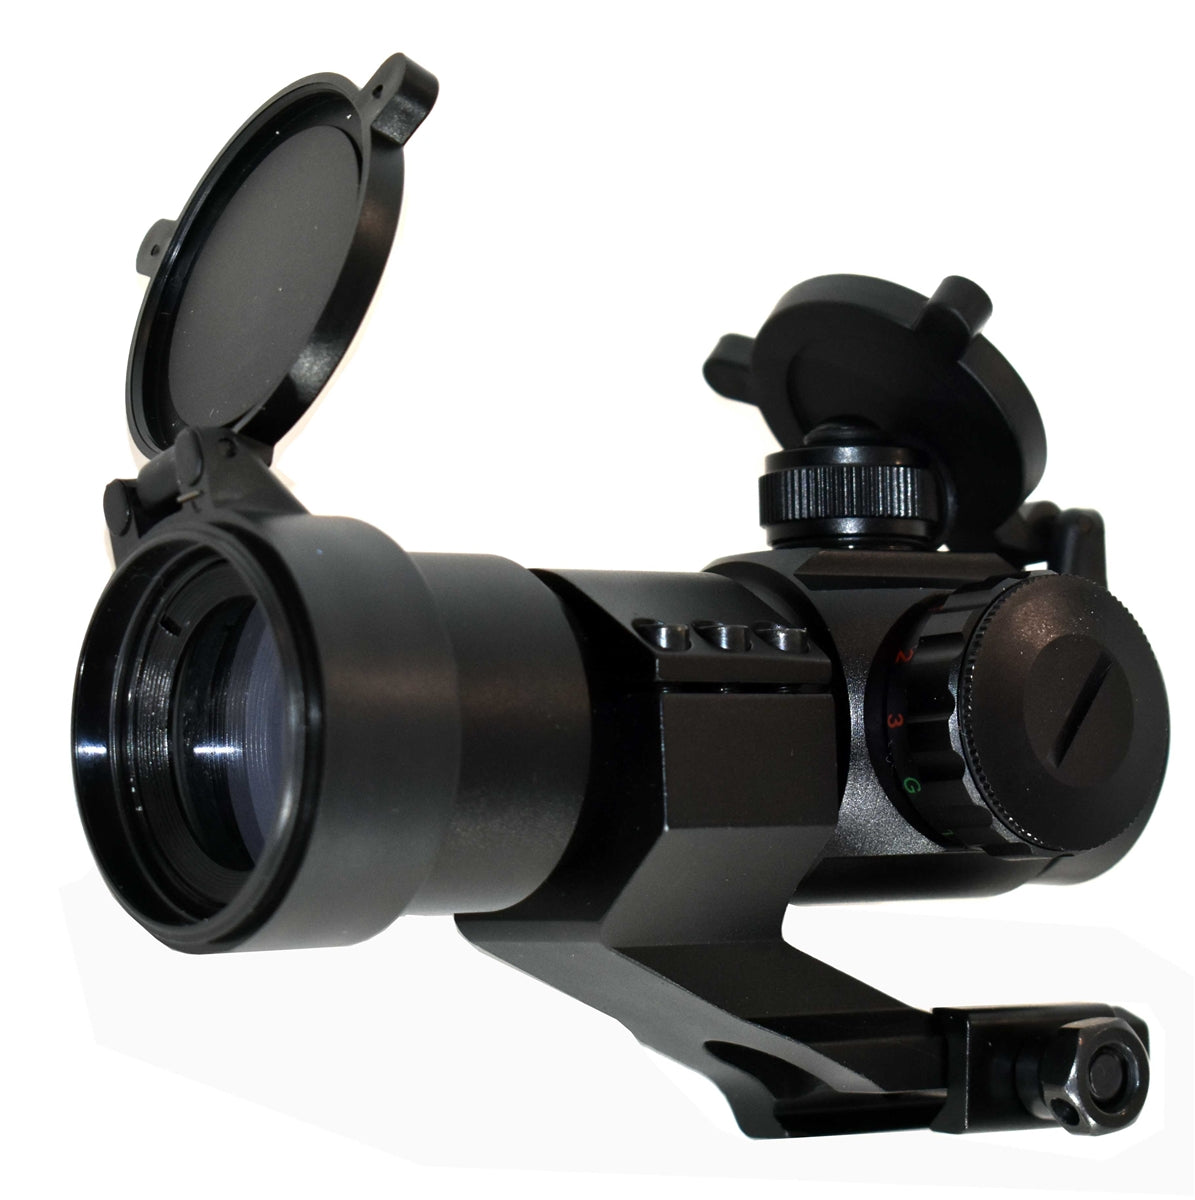 Tactical Red Green Blue Dot Sight with Trinity saddle mount for Remington 870 tac-14 12 gauge pump.